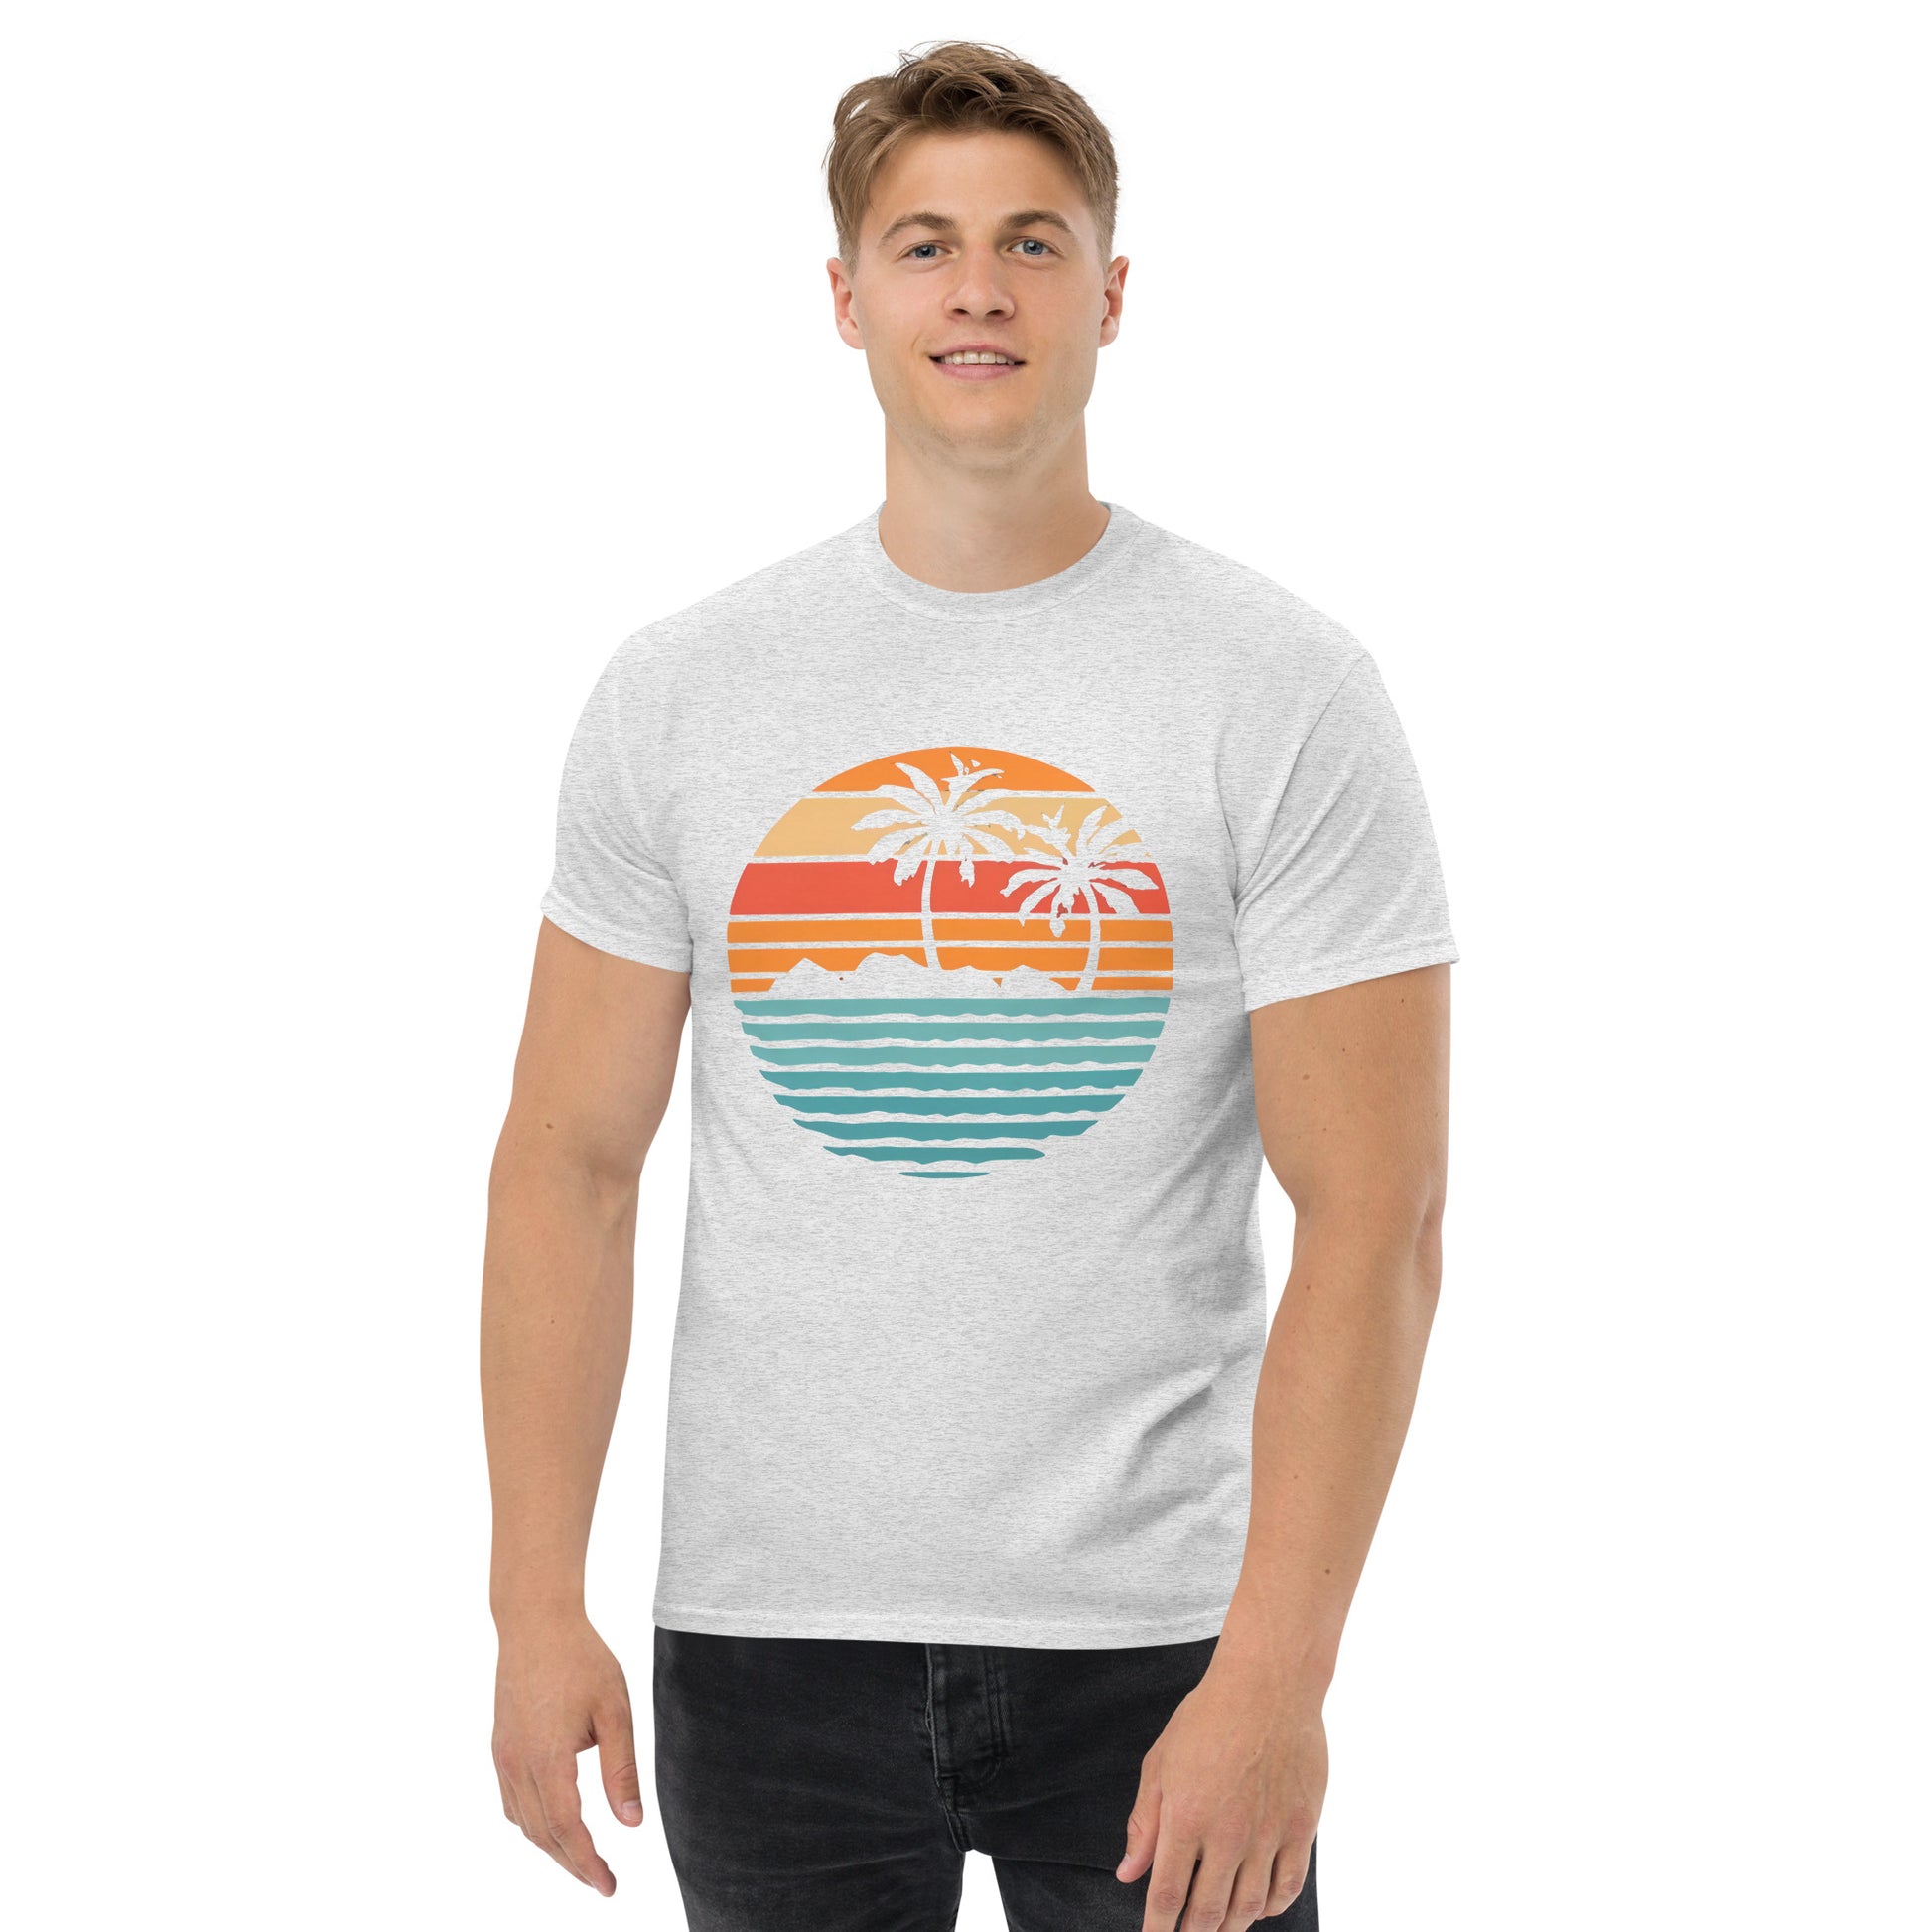 Men with ash T-shirt and a retro Island